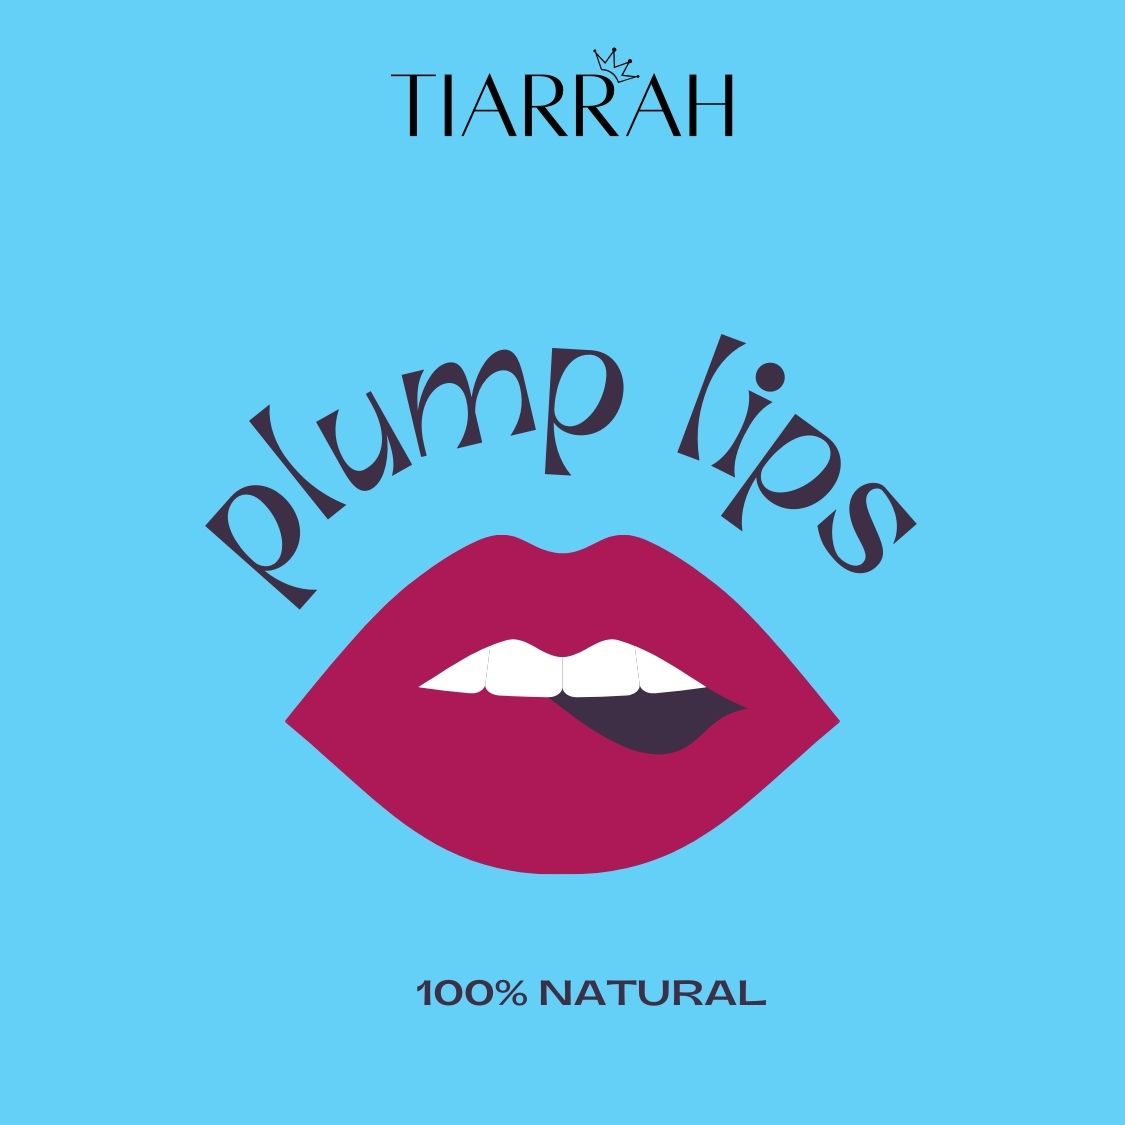 Tiarrah's Ruby Pink Tint: Natural & Non-Toxic - The Luxury Bath and Body Care Shop